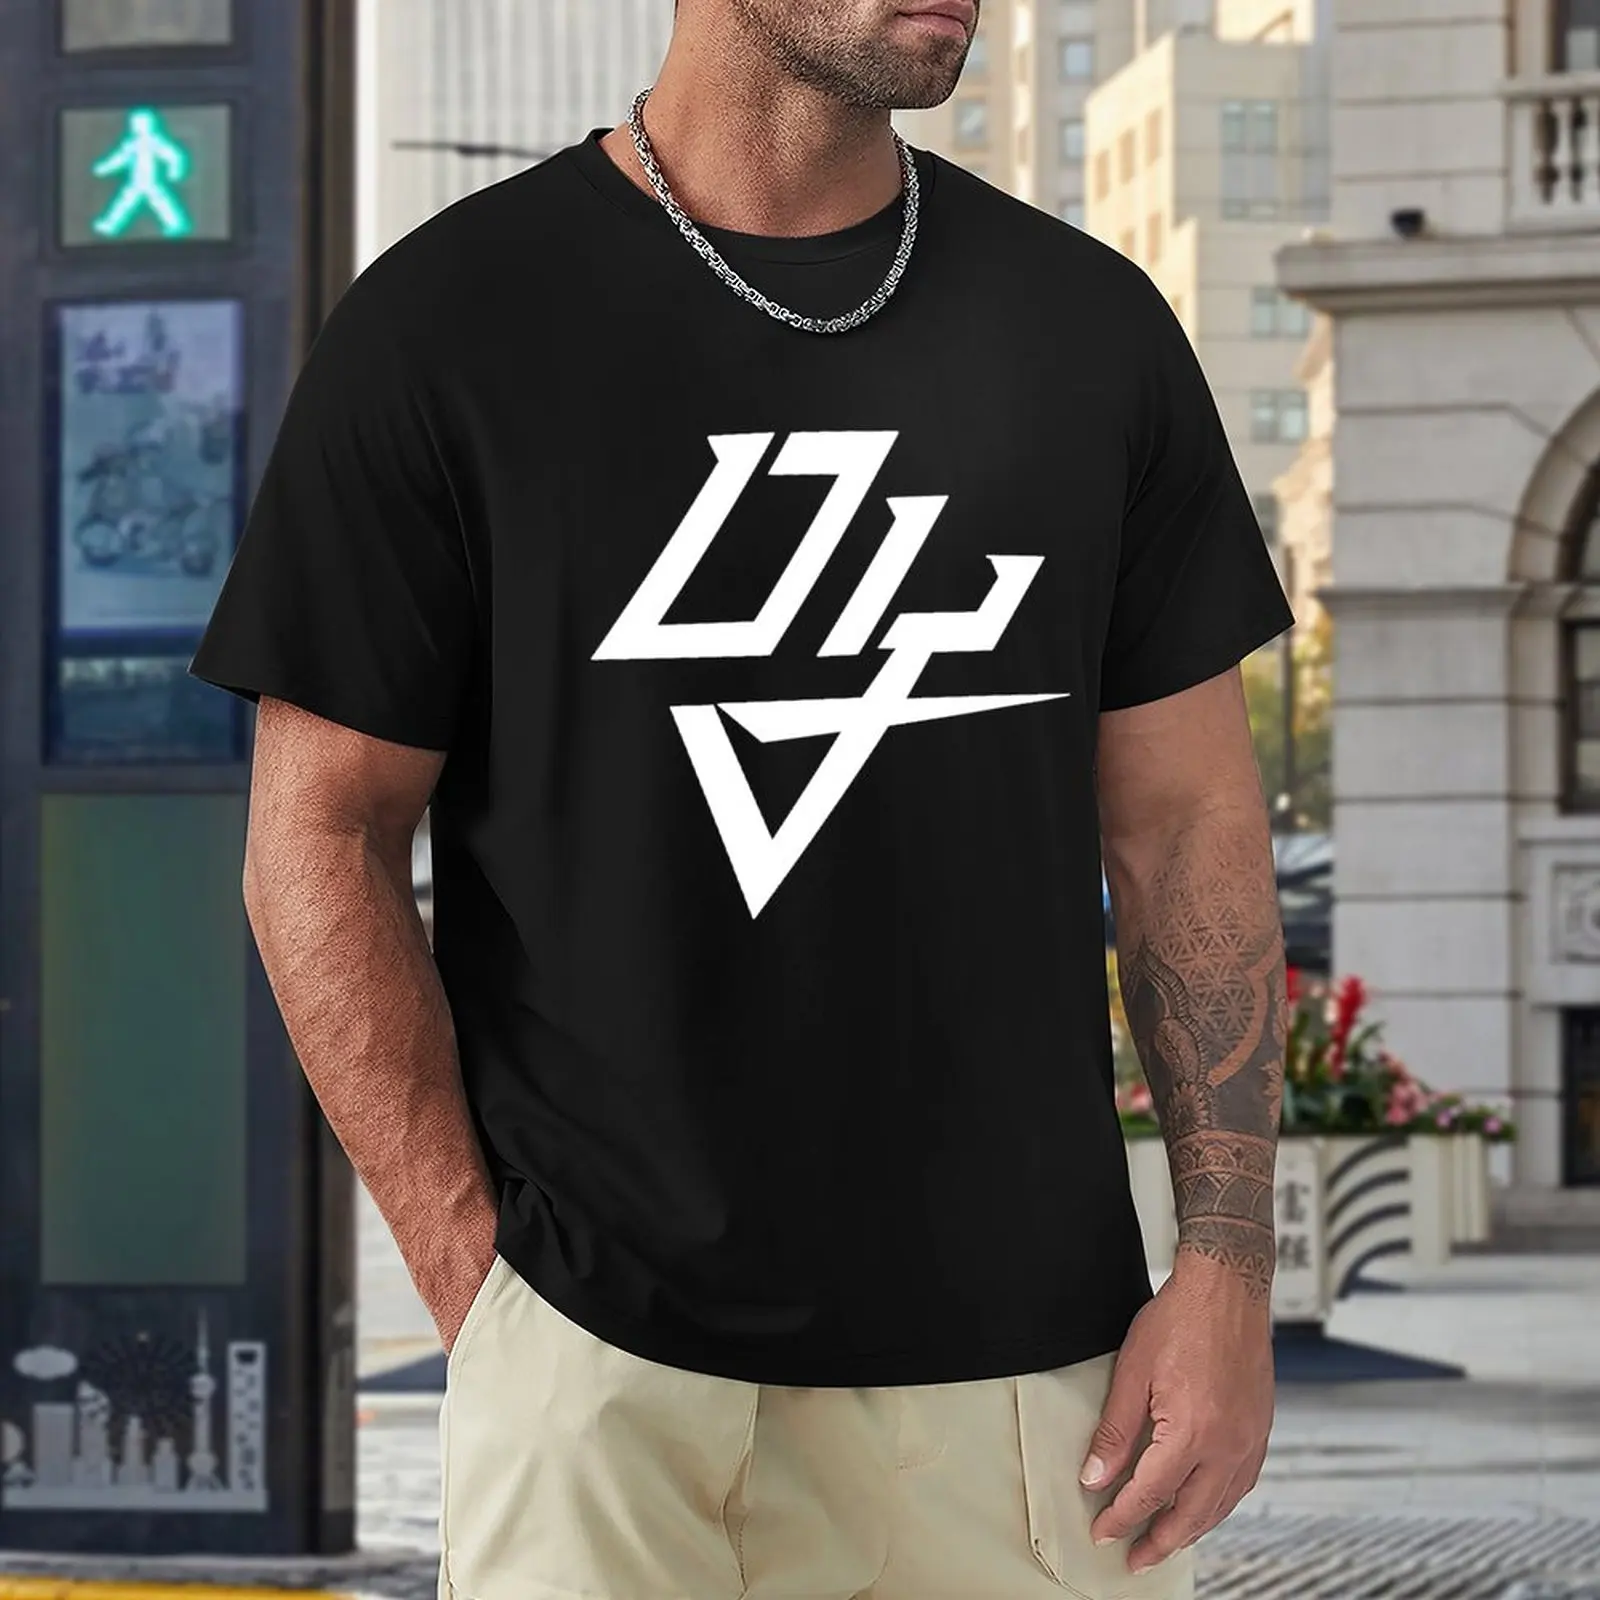 DADDY YANKEE 01 T-Shirt summer clothes graphic t shirts tees Men's clothing